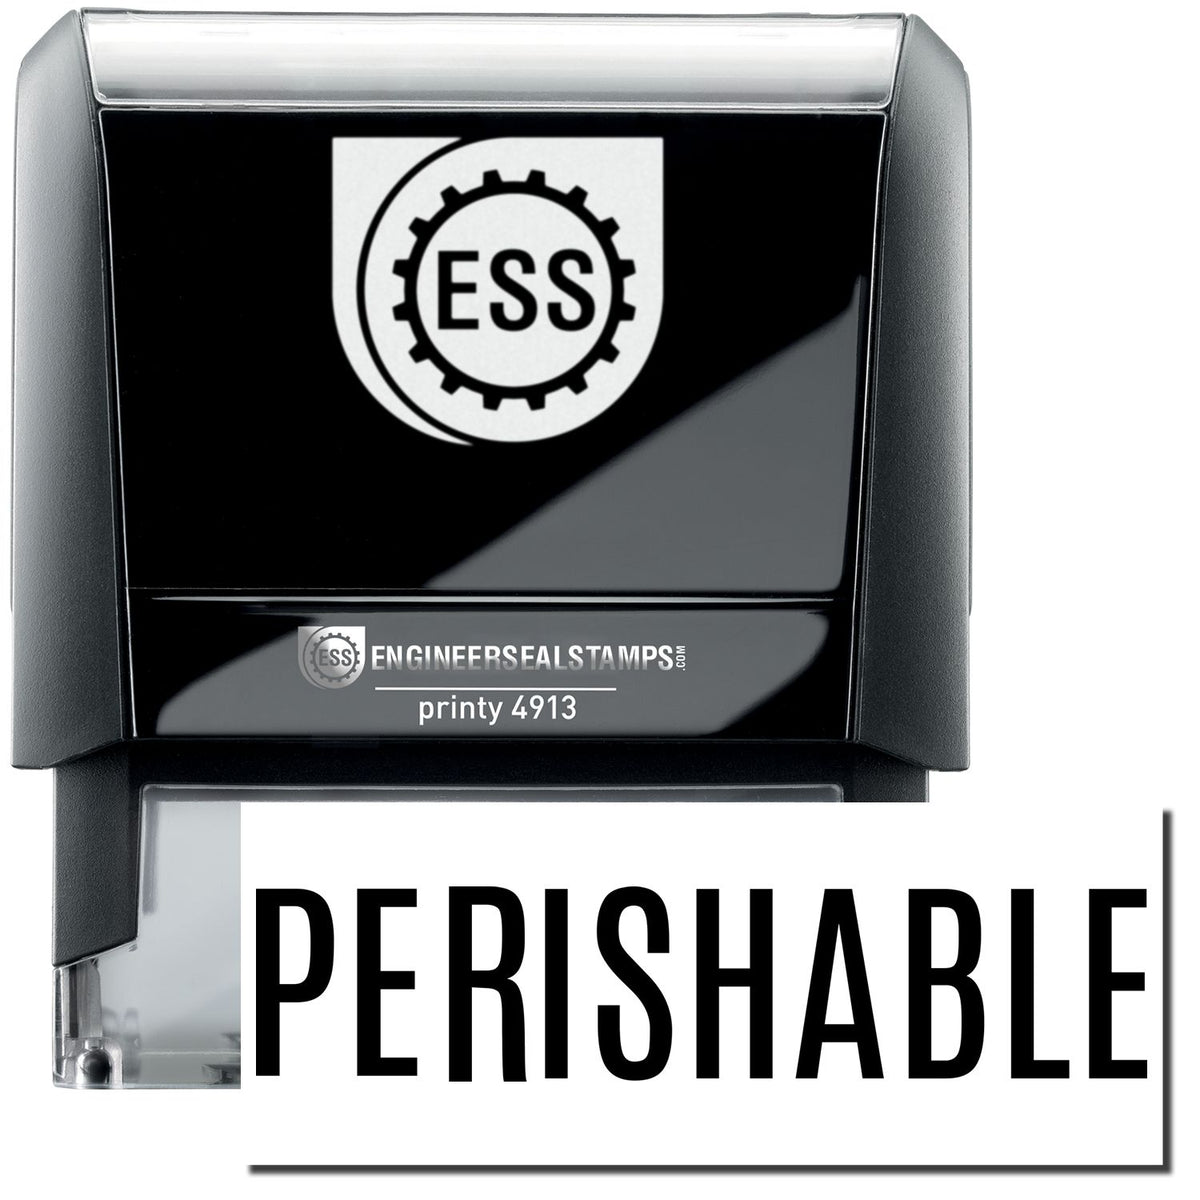 A self-inking stamp with a stamped image showing how the text &quot;PERISHABLE&quot; in a large font is displayed by it after stamping.